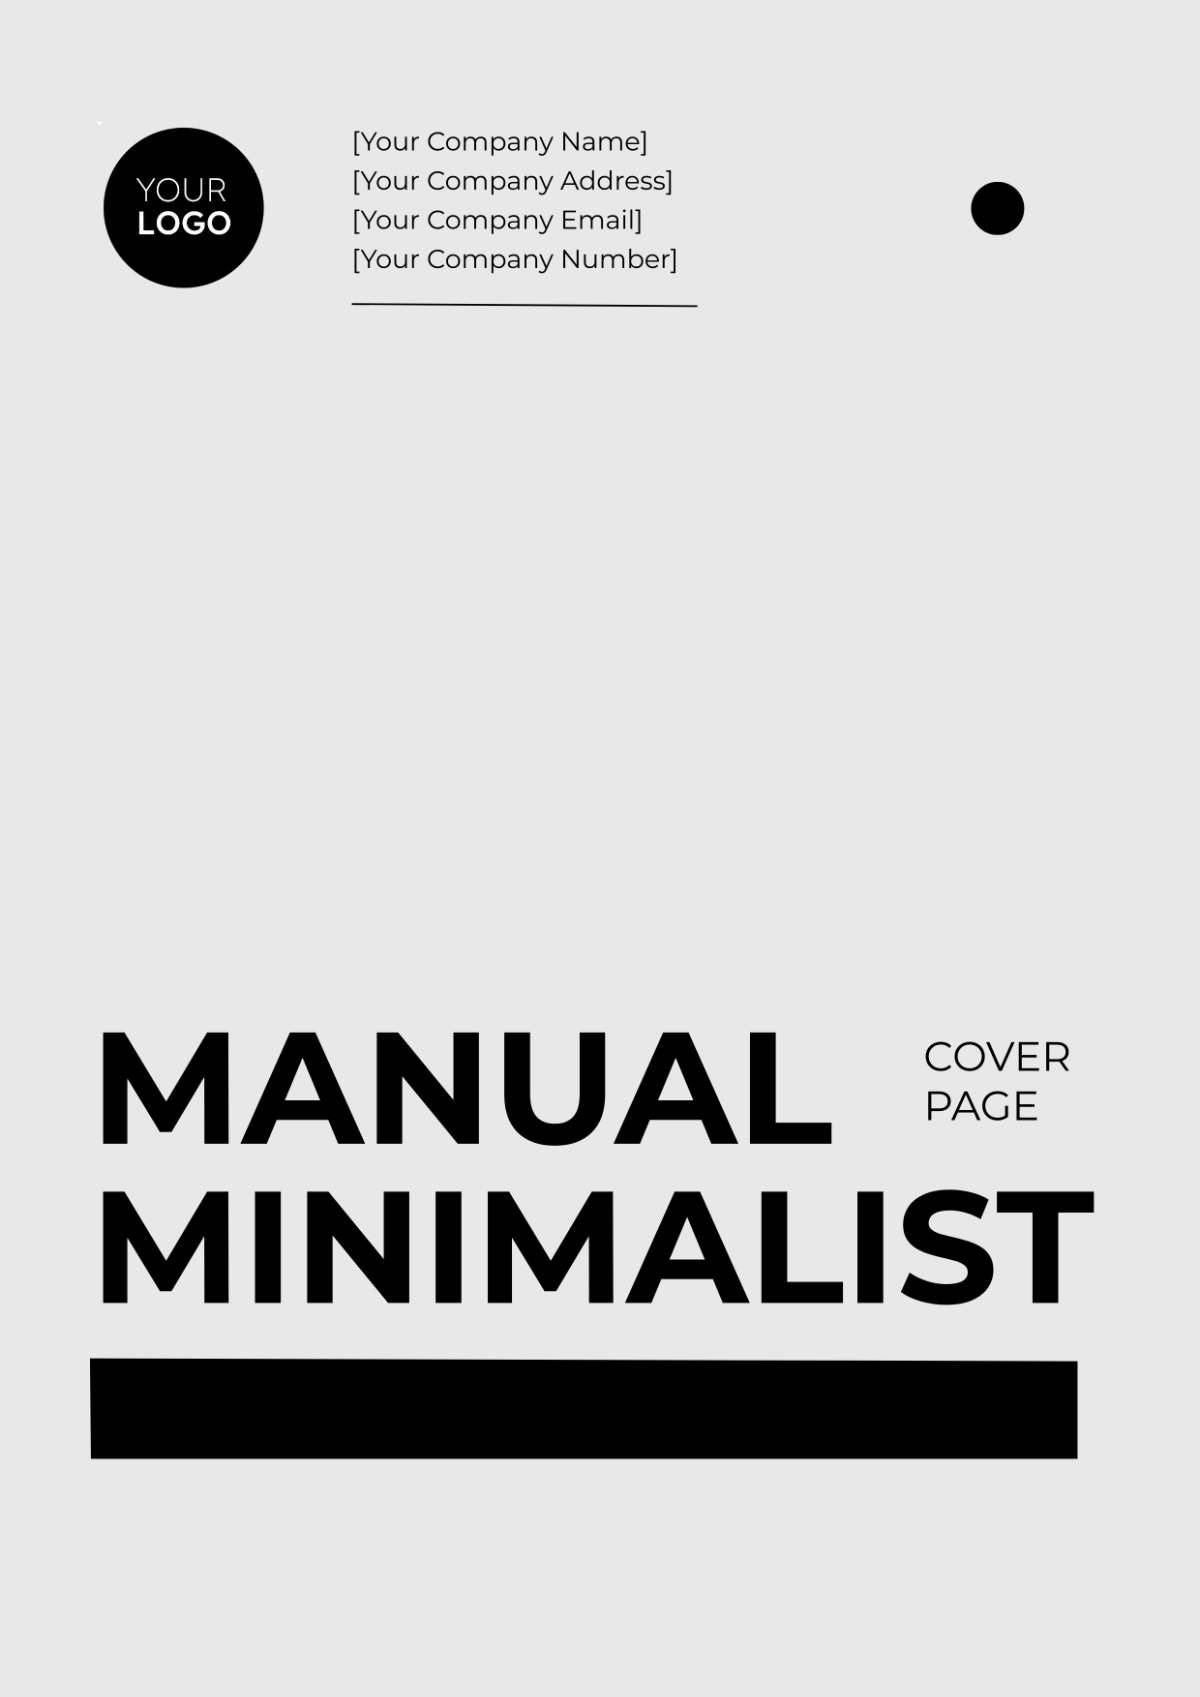 Manual Minimalist Cover Page